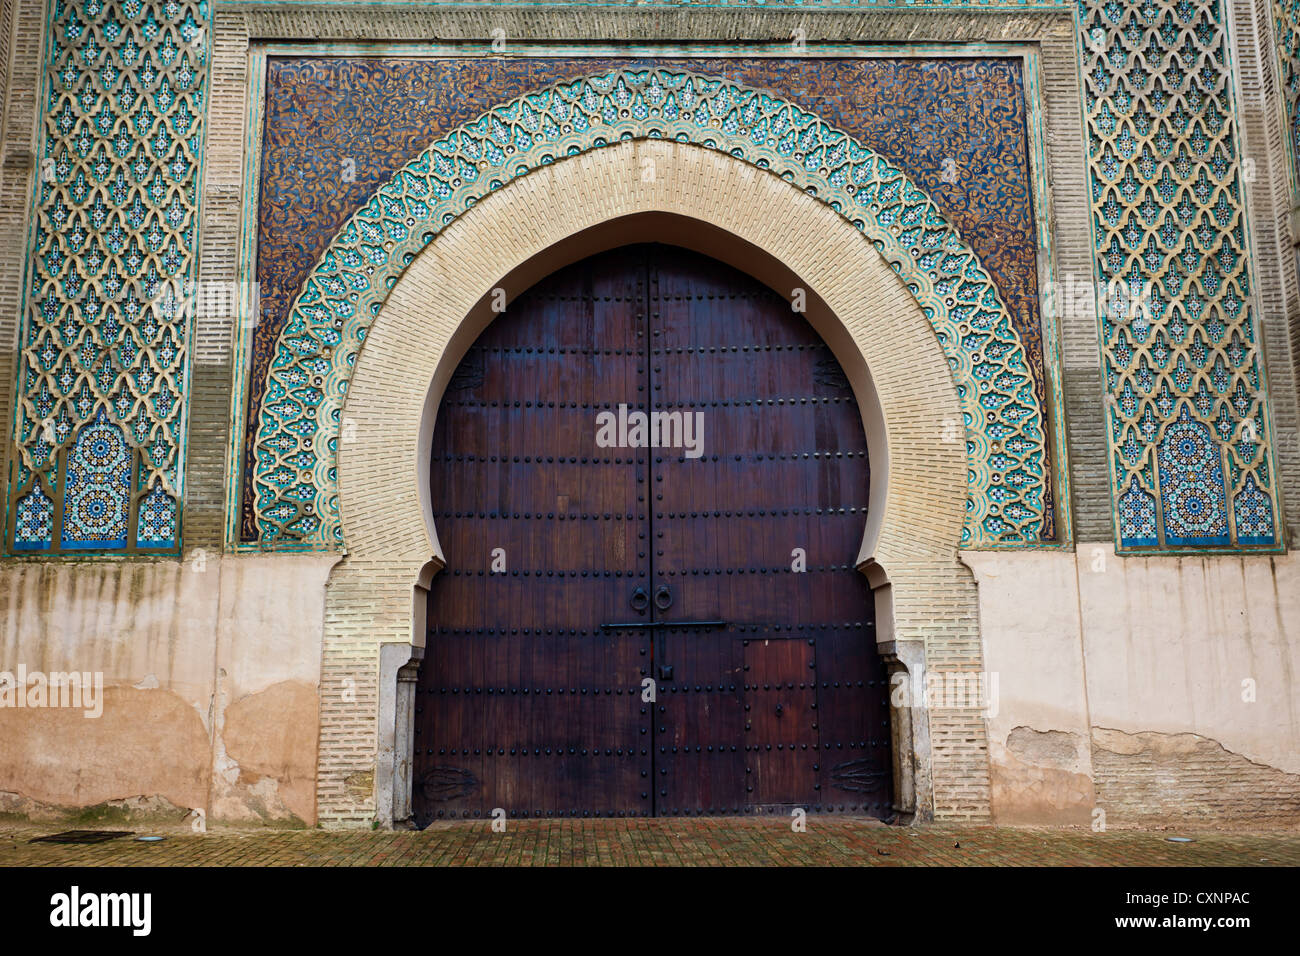 Closeup of mosaic tile designs and wooden arched exterior door to Mosque in Meknes, Morocco. Stock Photo